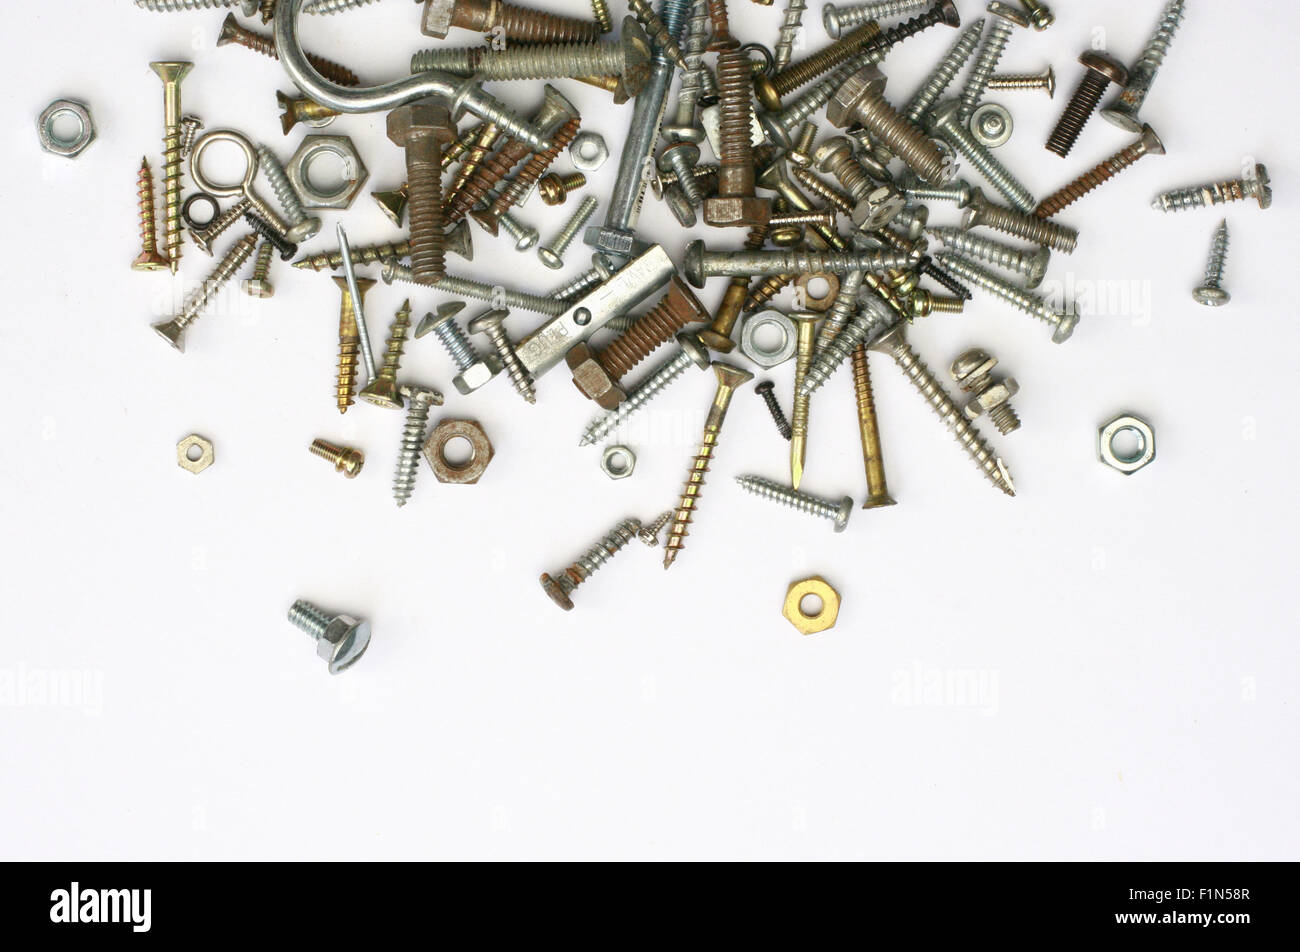 A pile of nuts,bolts, screws and other fasteners on a white background Stock Photo